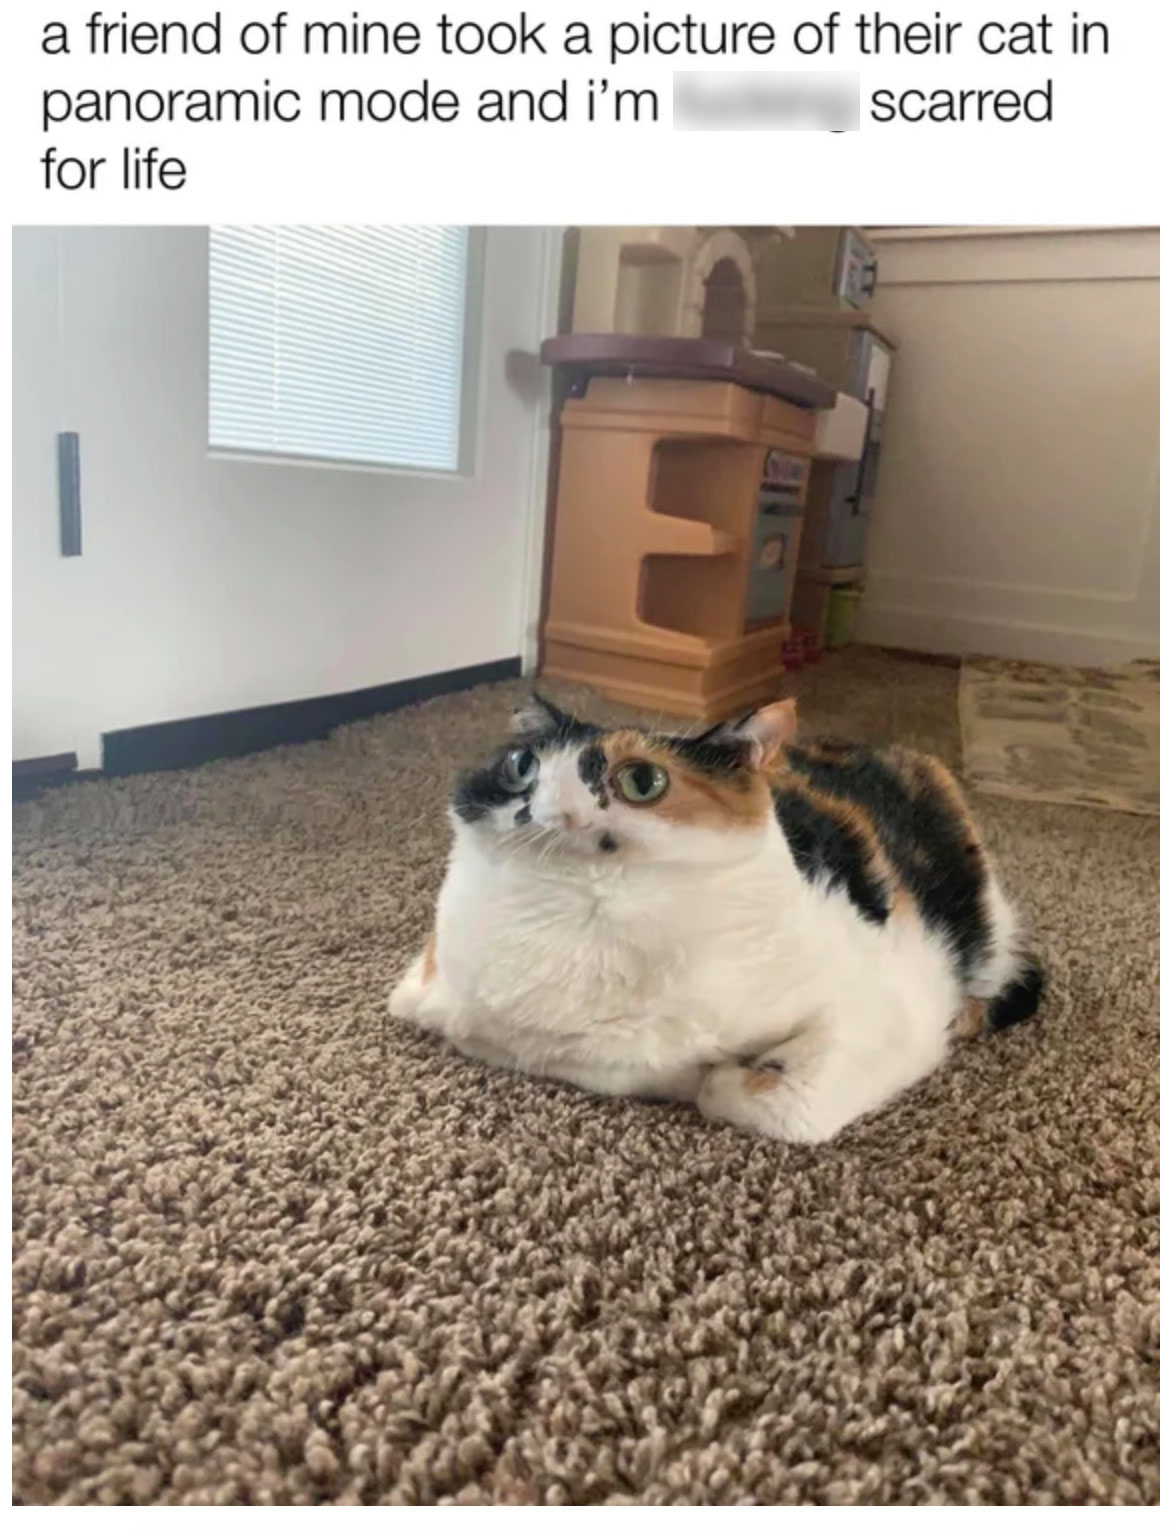 photo caption - a friend of mine took a picture of their cat in panoramic mode and i'm scarred for life